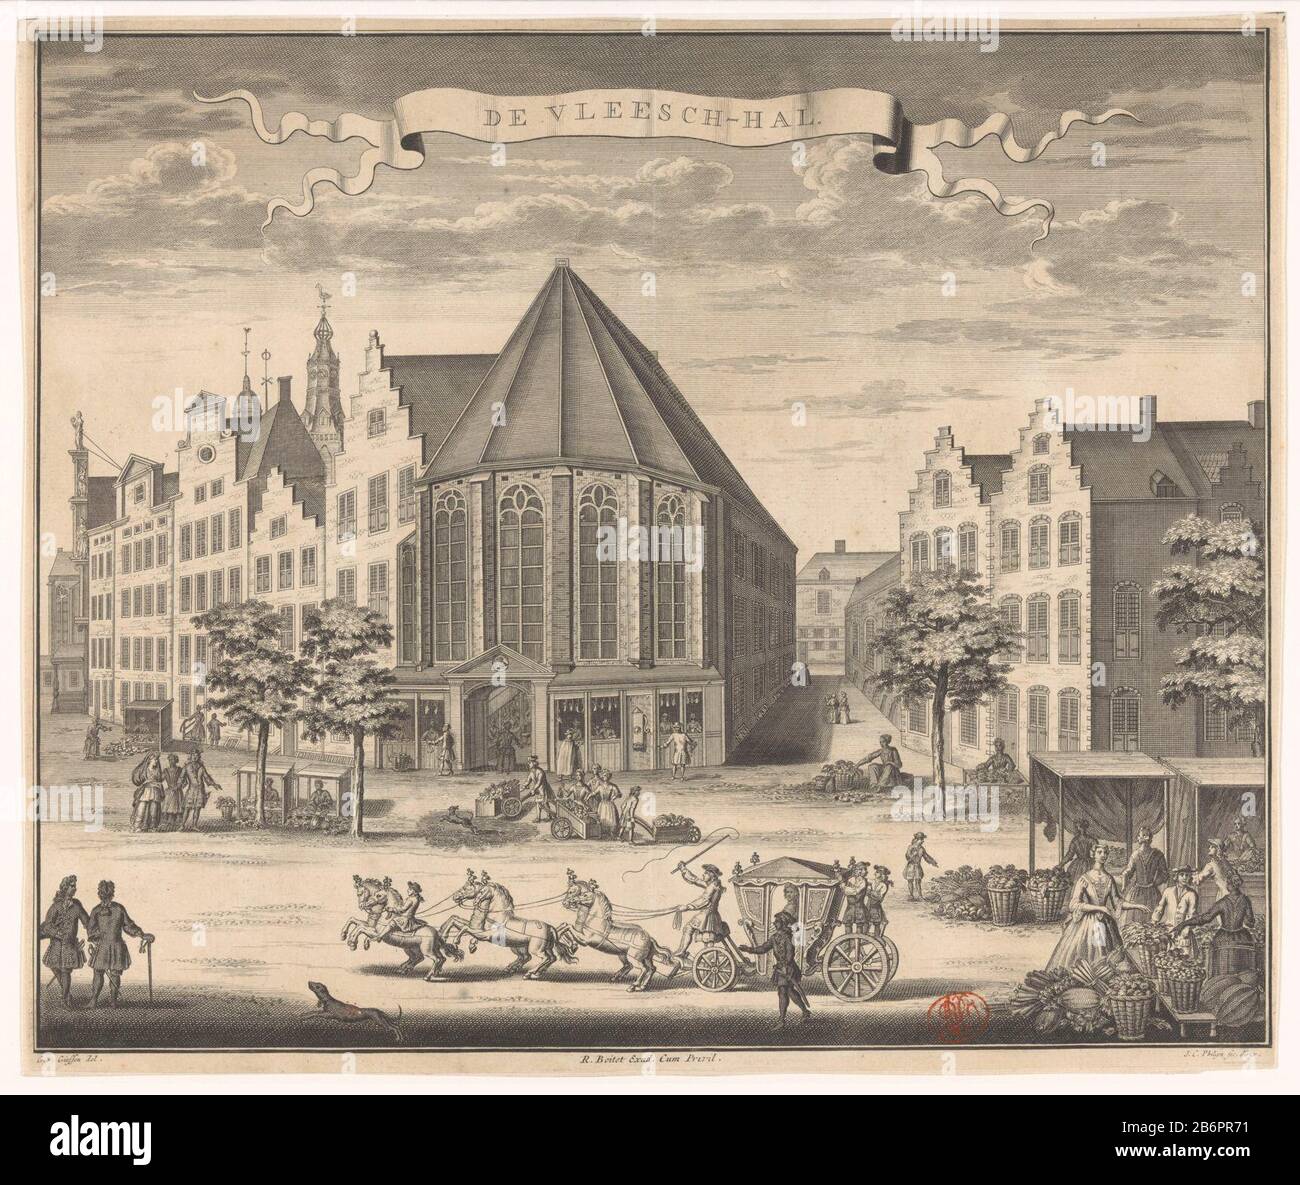 Gezicht op de Vleeshal te Den Haag De Vleesch-hal (titel op object) View the Vleeshal Hague, housed in the former St. Nicholas Chapel. Various street stalls, figures and koets. Manufacturer : printmaker Jan Caspar Philips (listed building) supervision: Jan Caspar Philips (listed property) to drawing: Gerrit van Giessen (listed building) publisher: Reinier Boitet (listed object) editor: Adrian Douci Pietersz Provider of privilege unknown (listed property) Place manufacture: from drawing: The Hague Publisher: Delft Publisher: Amsterdam Date: 1730 - 1736 Material: paper Technique: etching / engra Stock Photo